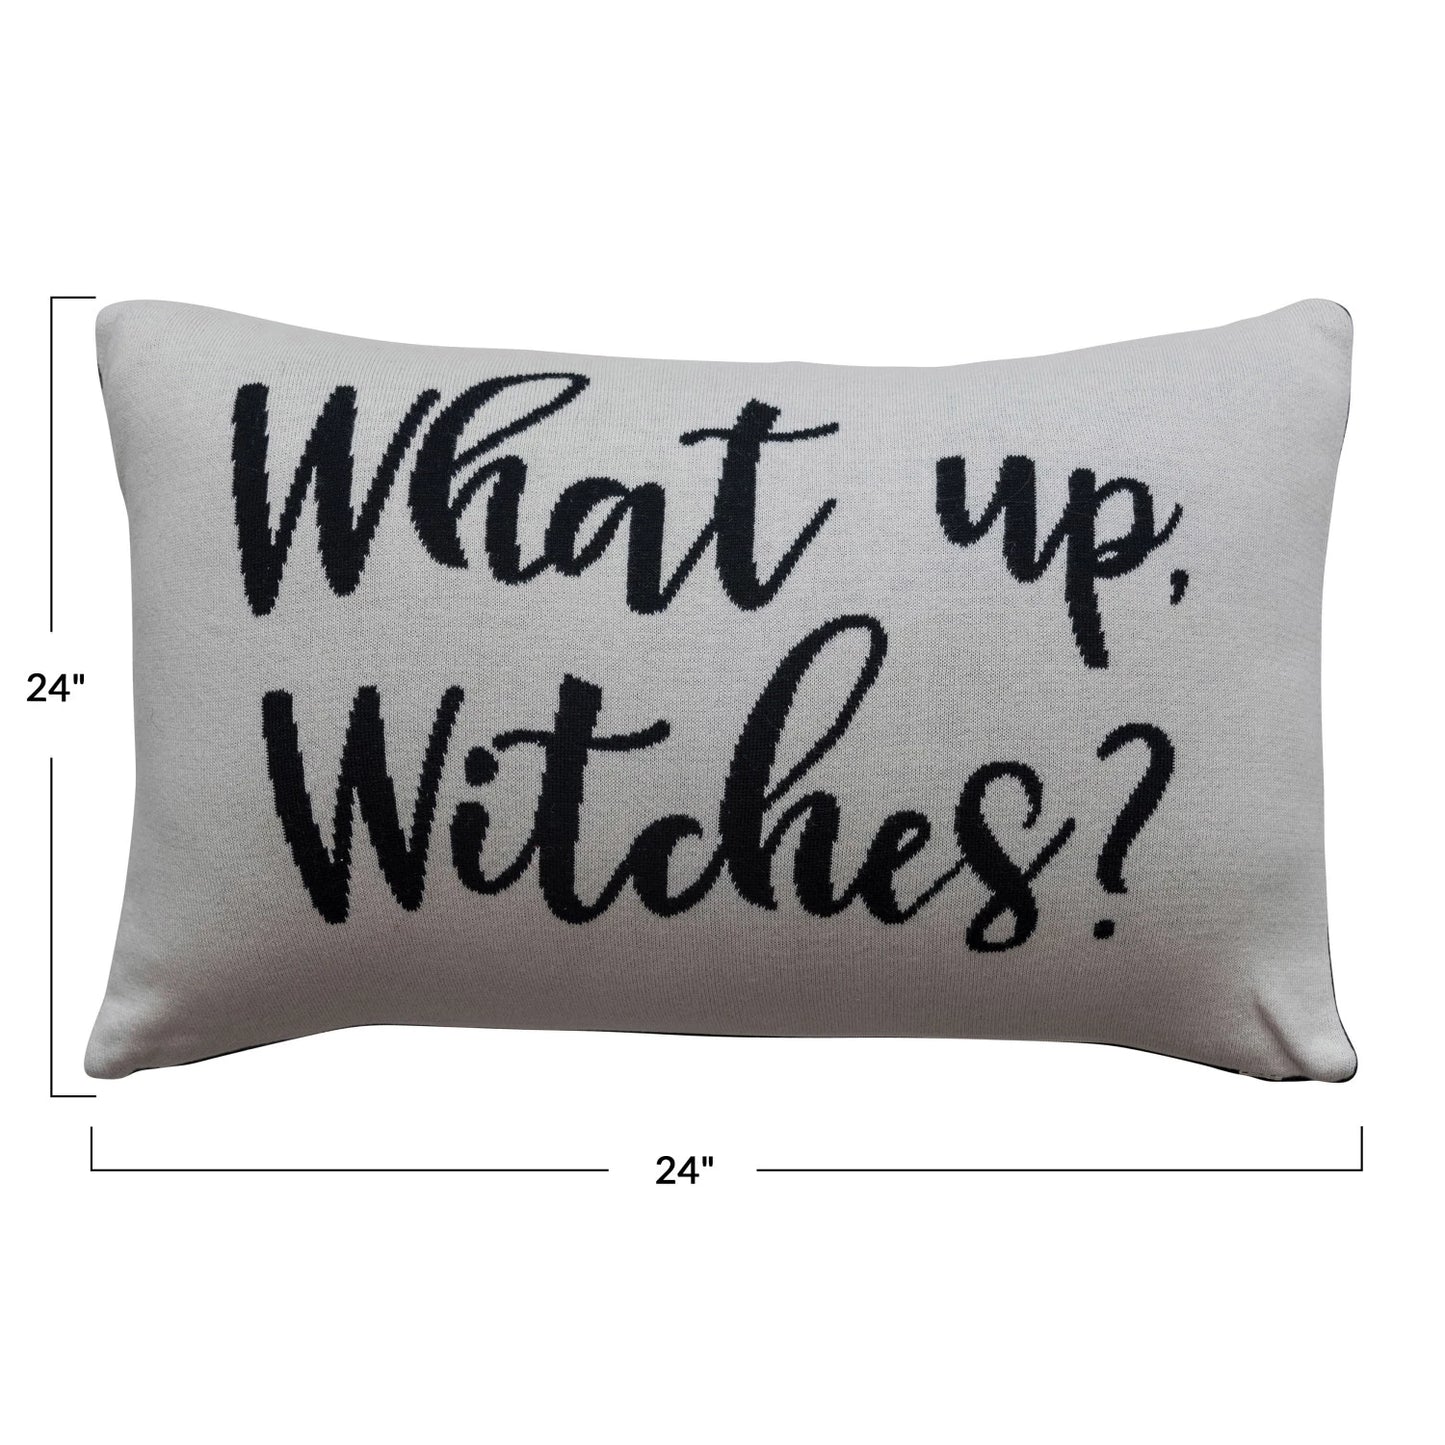 24" Two-Sided Cotton Knit Pillow | What Up, Witches? | Black & White